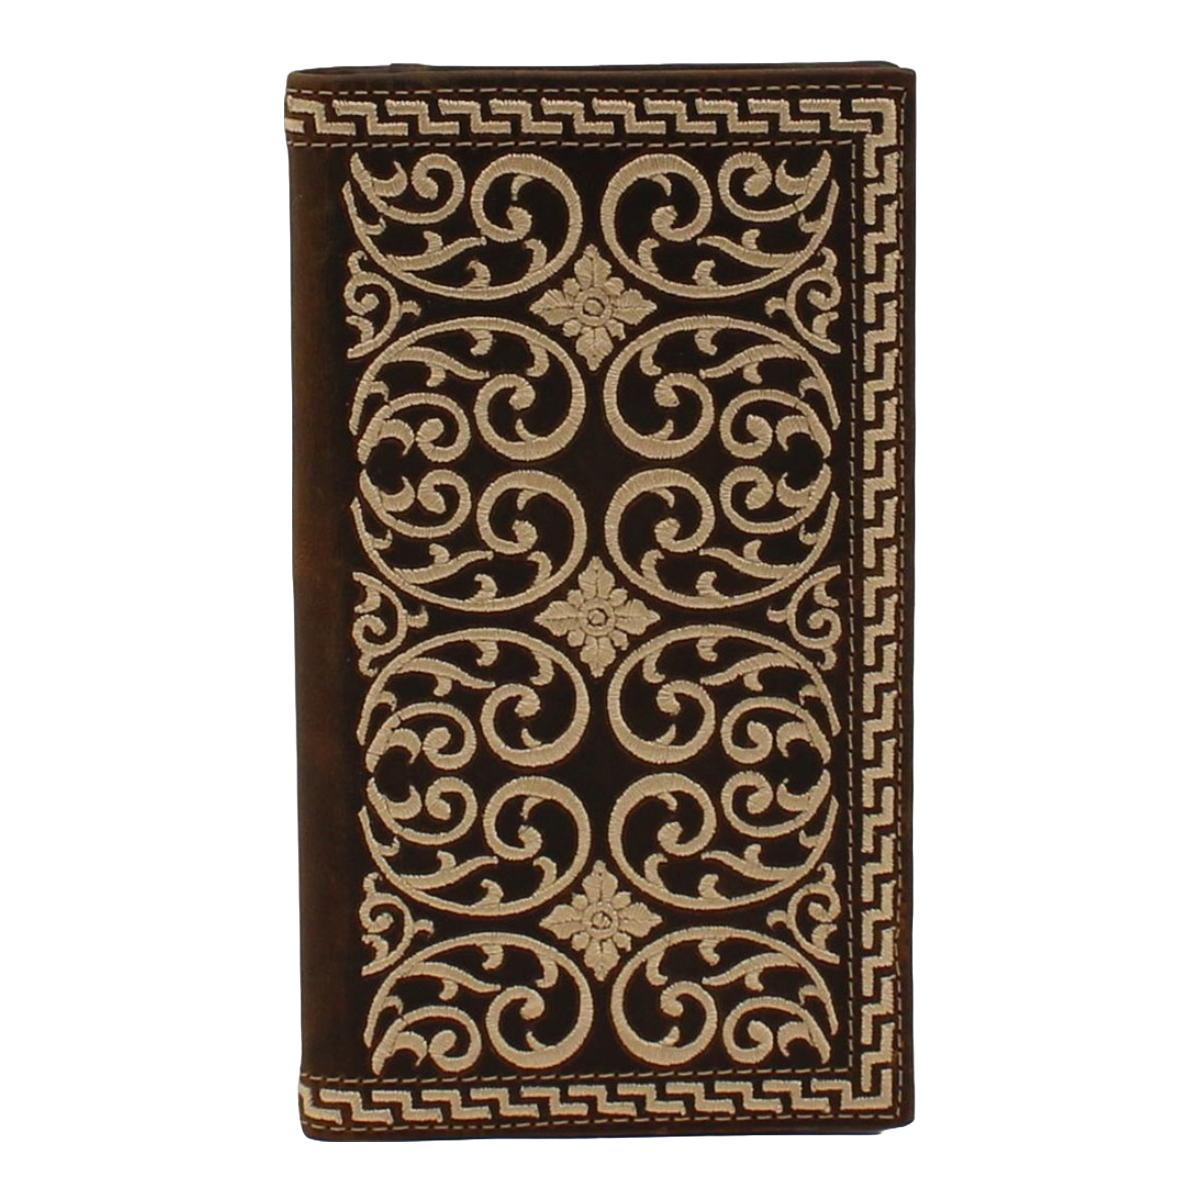 Nocona Men's Stitched Cream Western Embroidery Brown Wallet N500024002